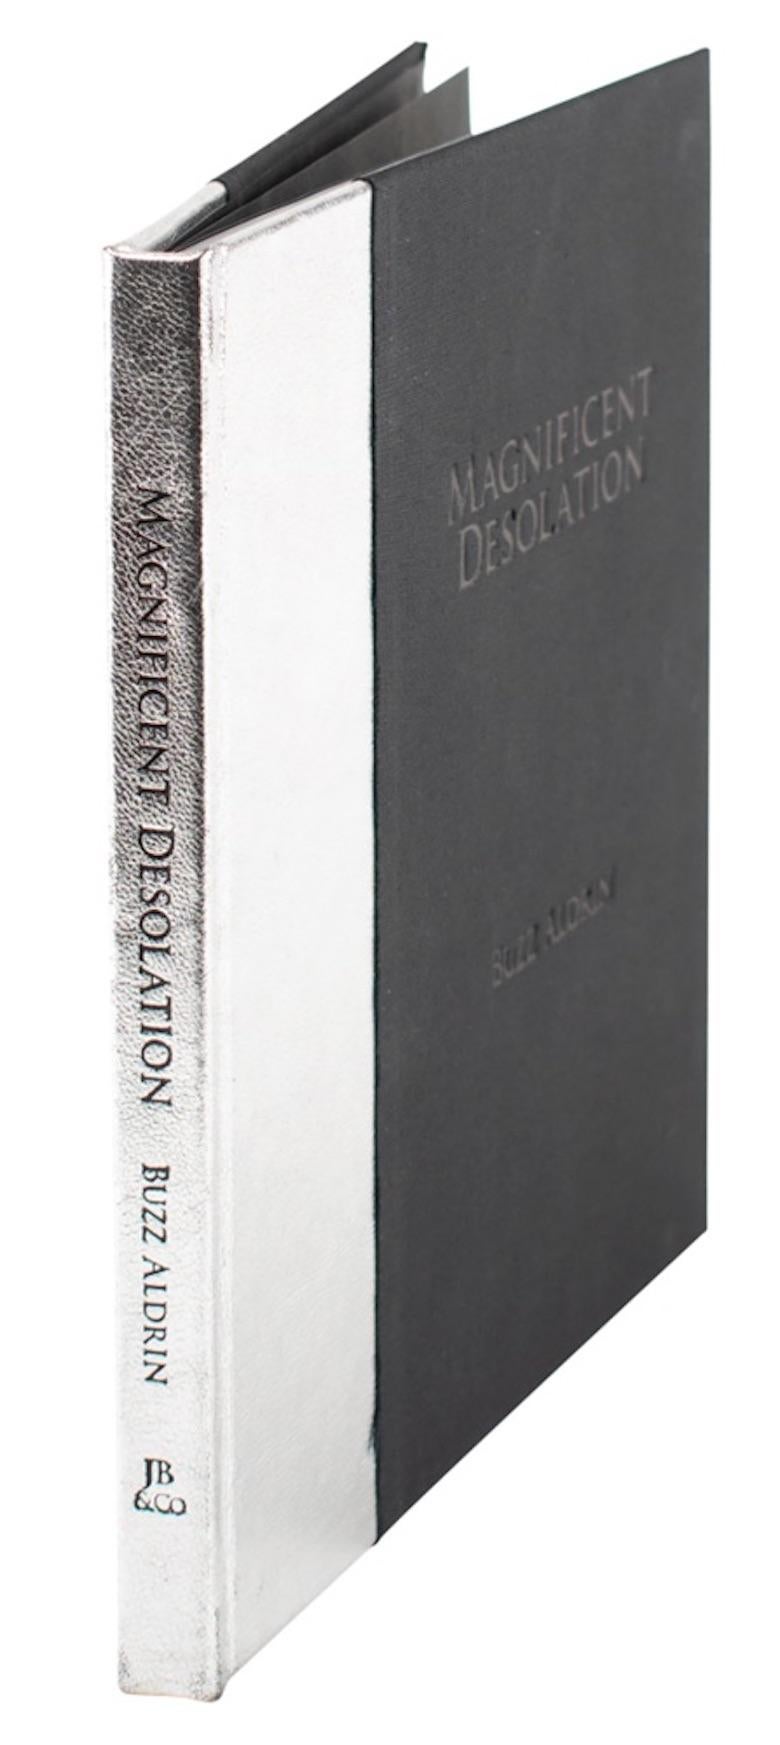 Aldrin, Buzz. Magnificent Desolation: Images from the Apollo 11 Lunar Mission with the Words of Astronaut Buzz Aldrin. Reno: Jack Bacon & Company, 2009. First Edition. Numbered 490 of 500. Signed by Astronaut Buzz Aldrin in blue ink. Small quarto,